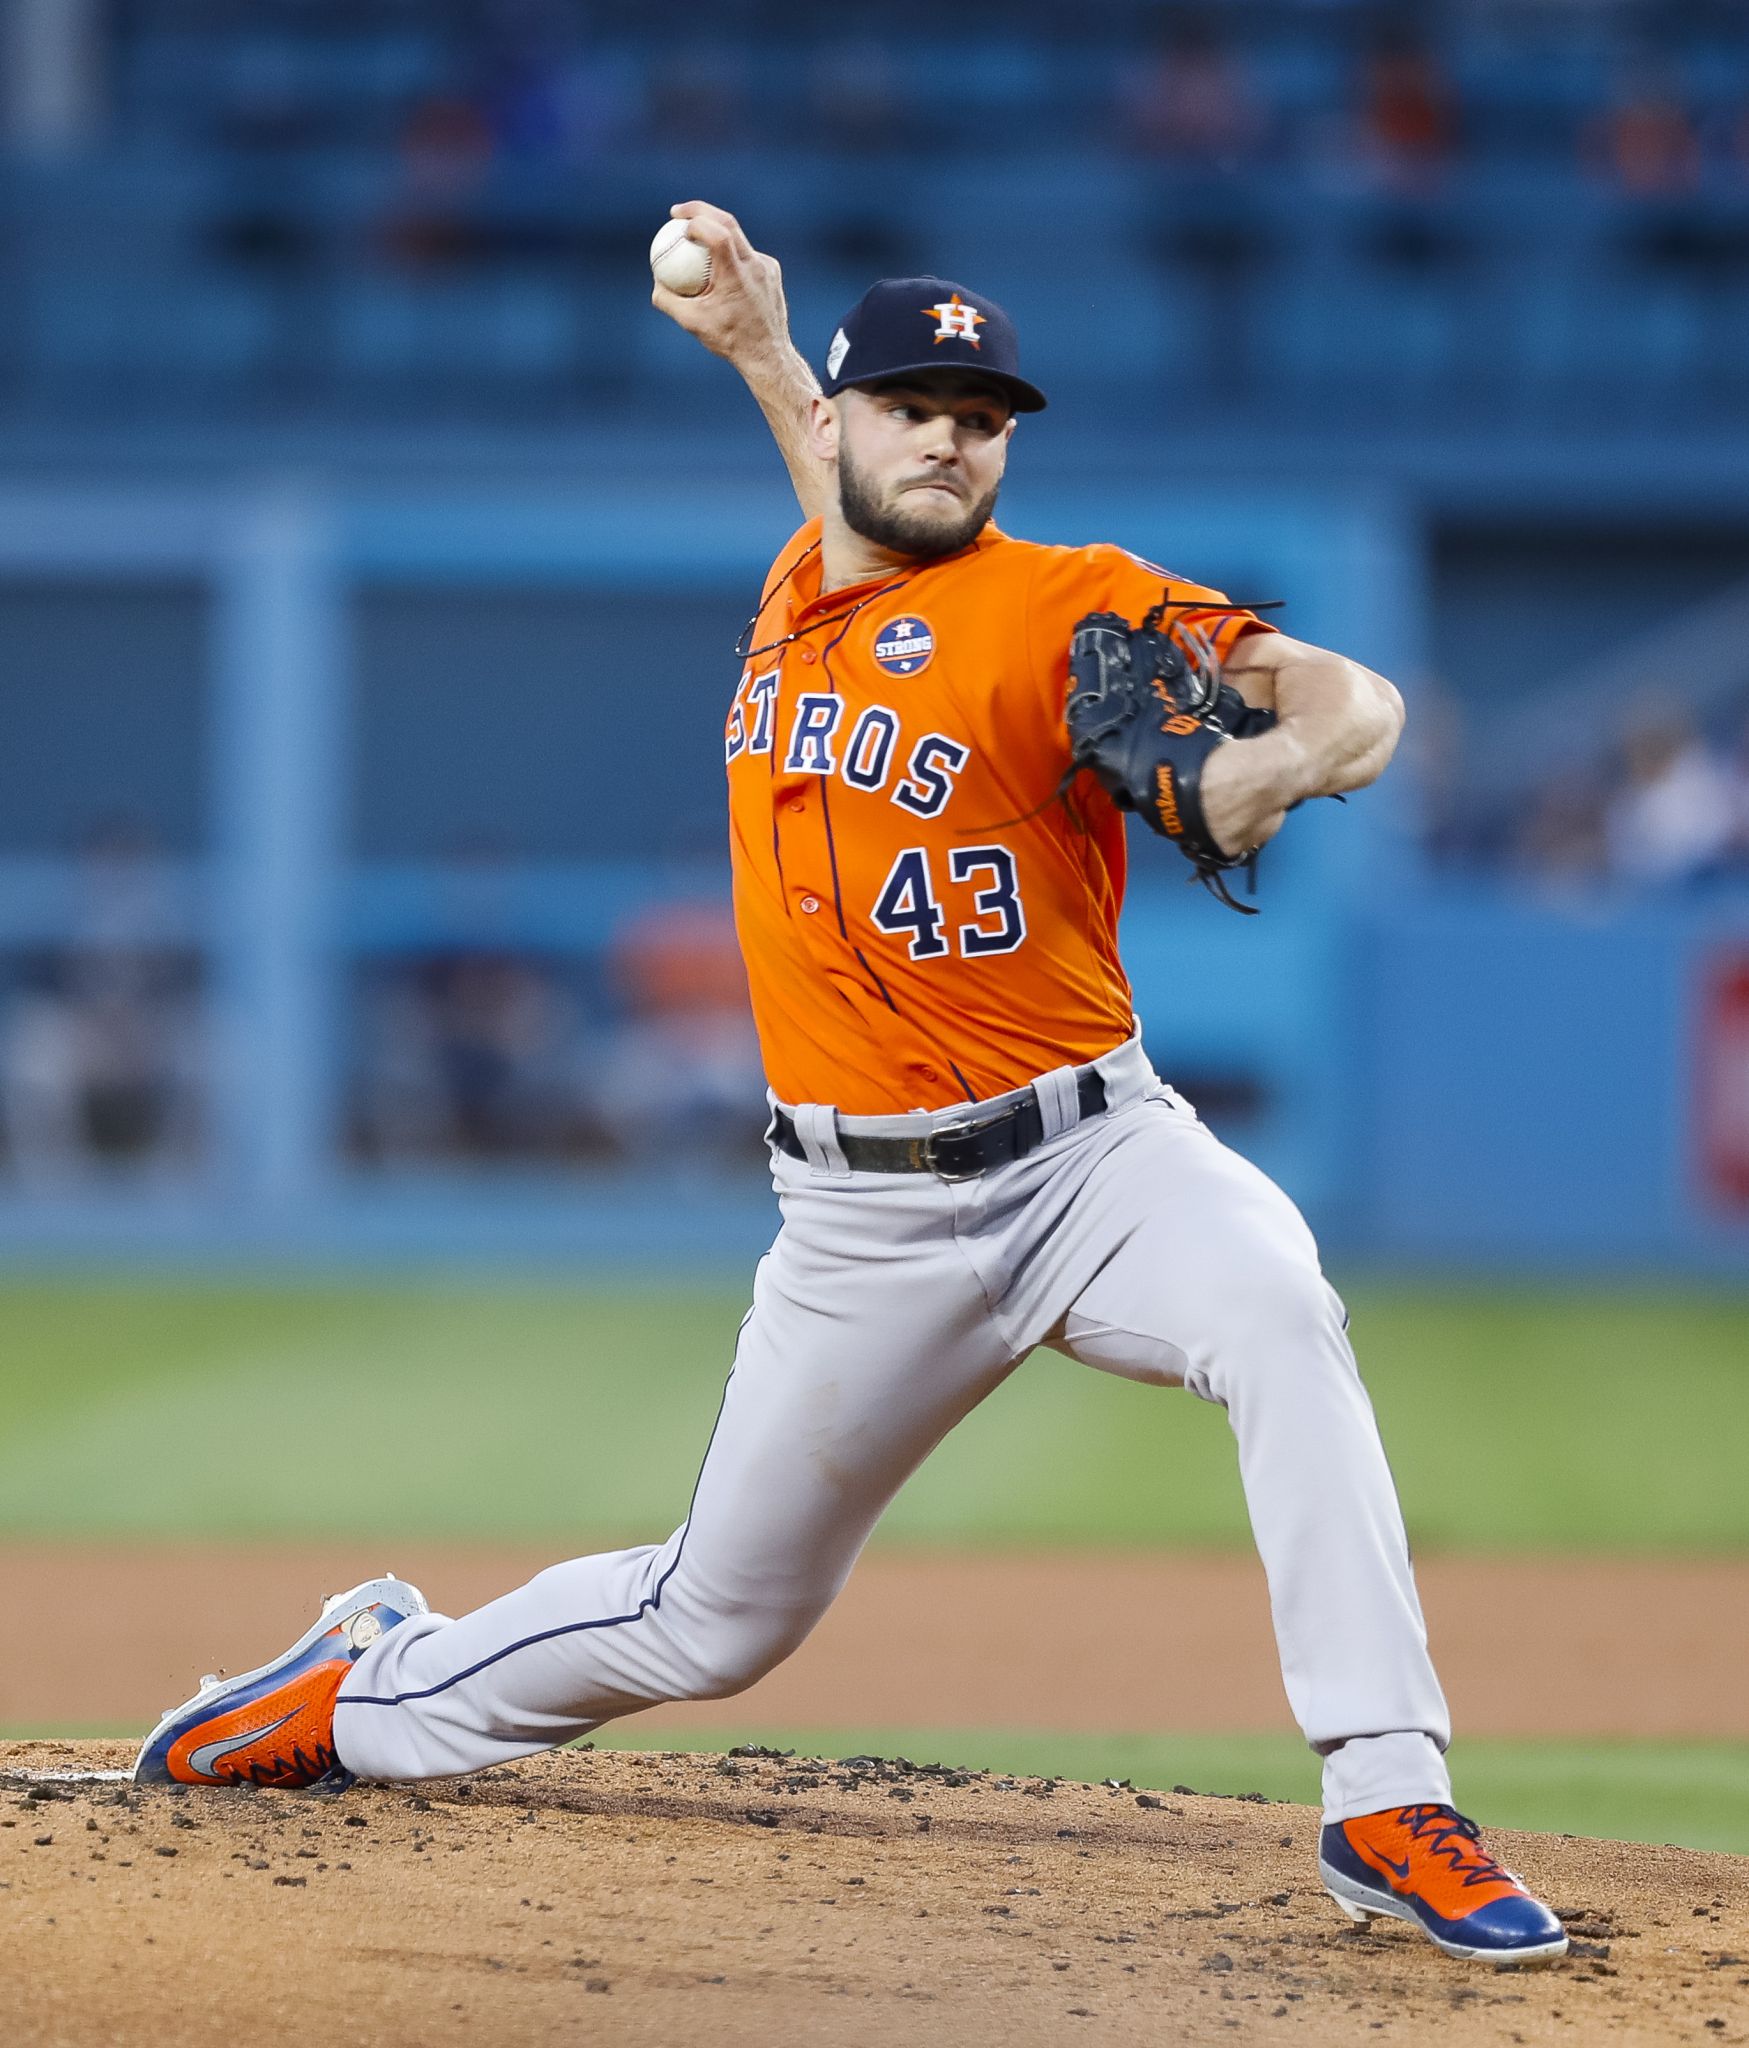 Lance McCullers has a passion for helping animals through pet